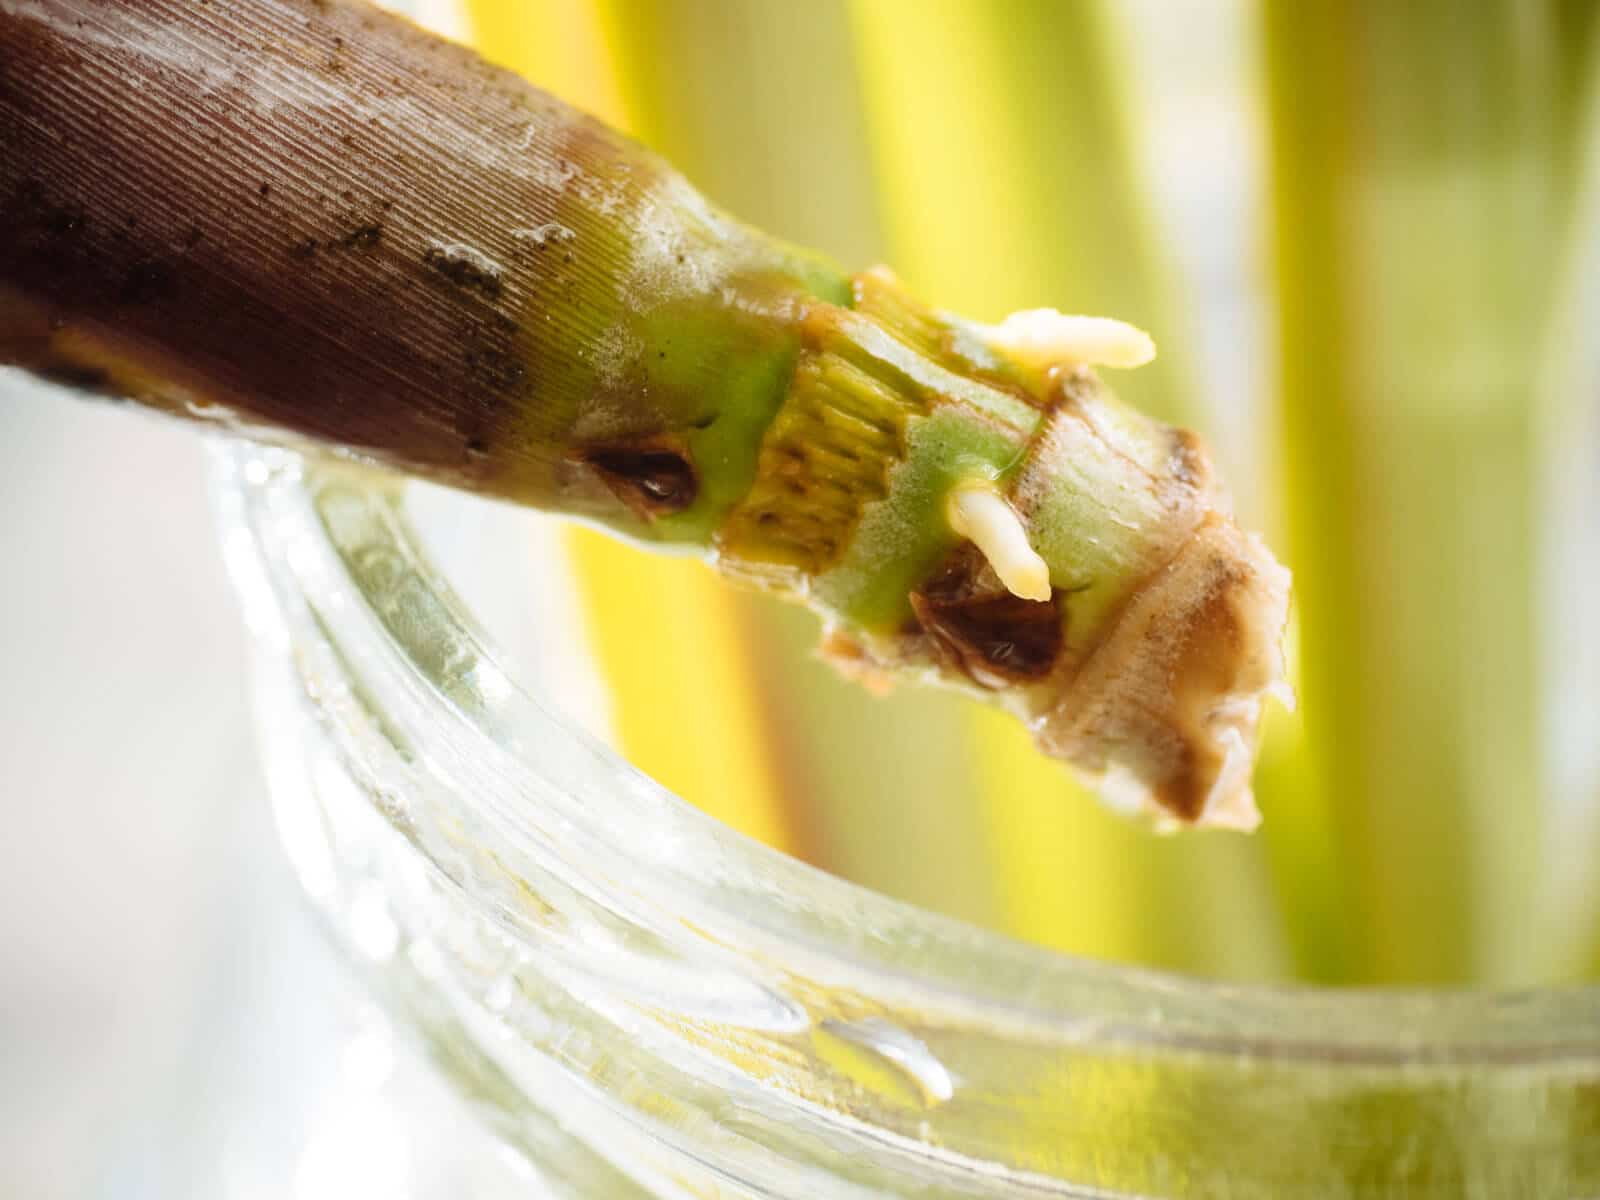 Roots will appear if you propagate lemongrass in water